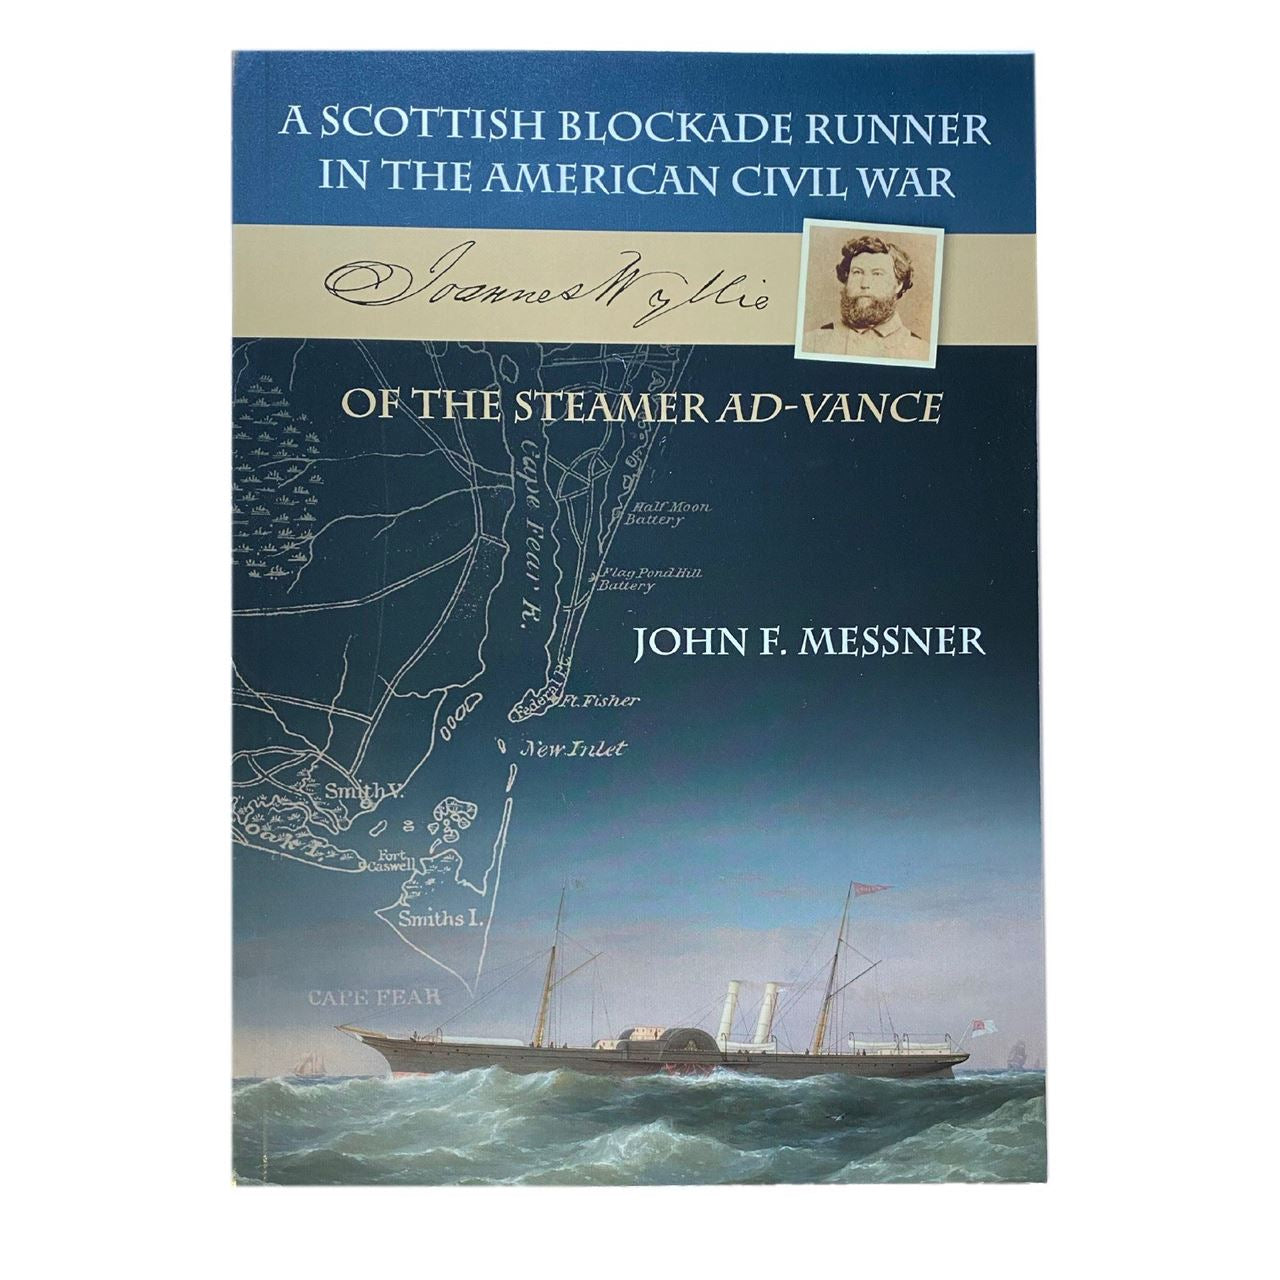 Joannes Wylie Of The Steamer Ad-vance - A Scottish Blockade Runner In The American Civil War